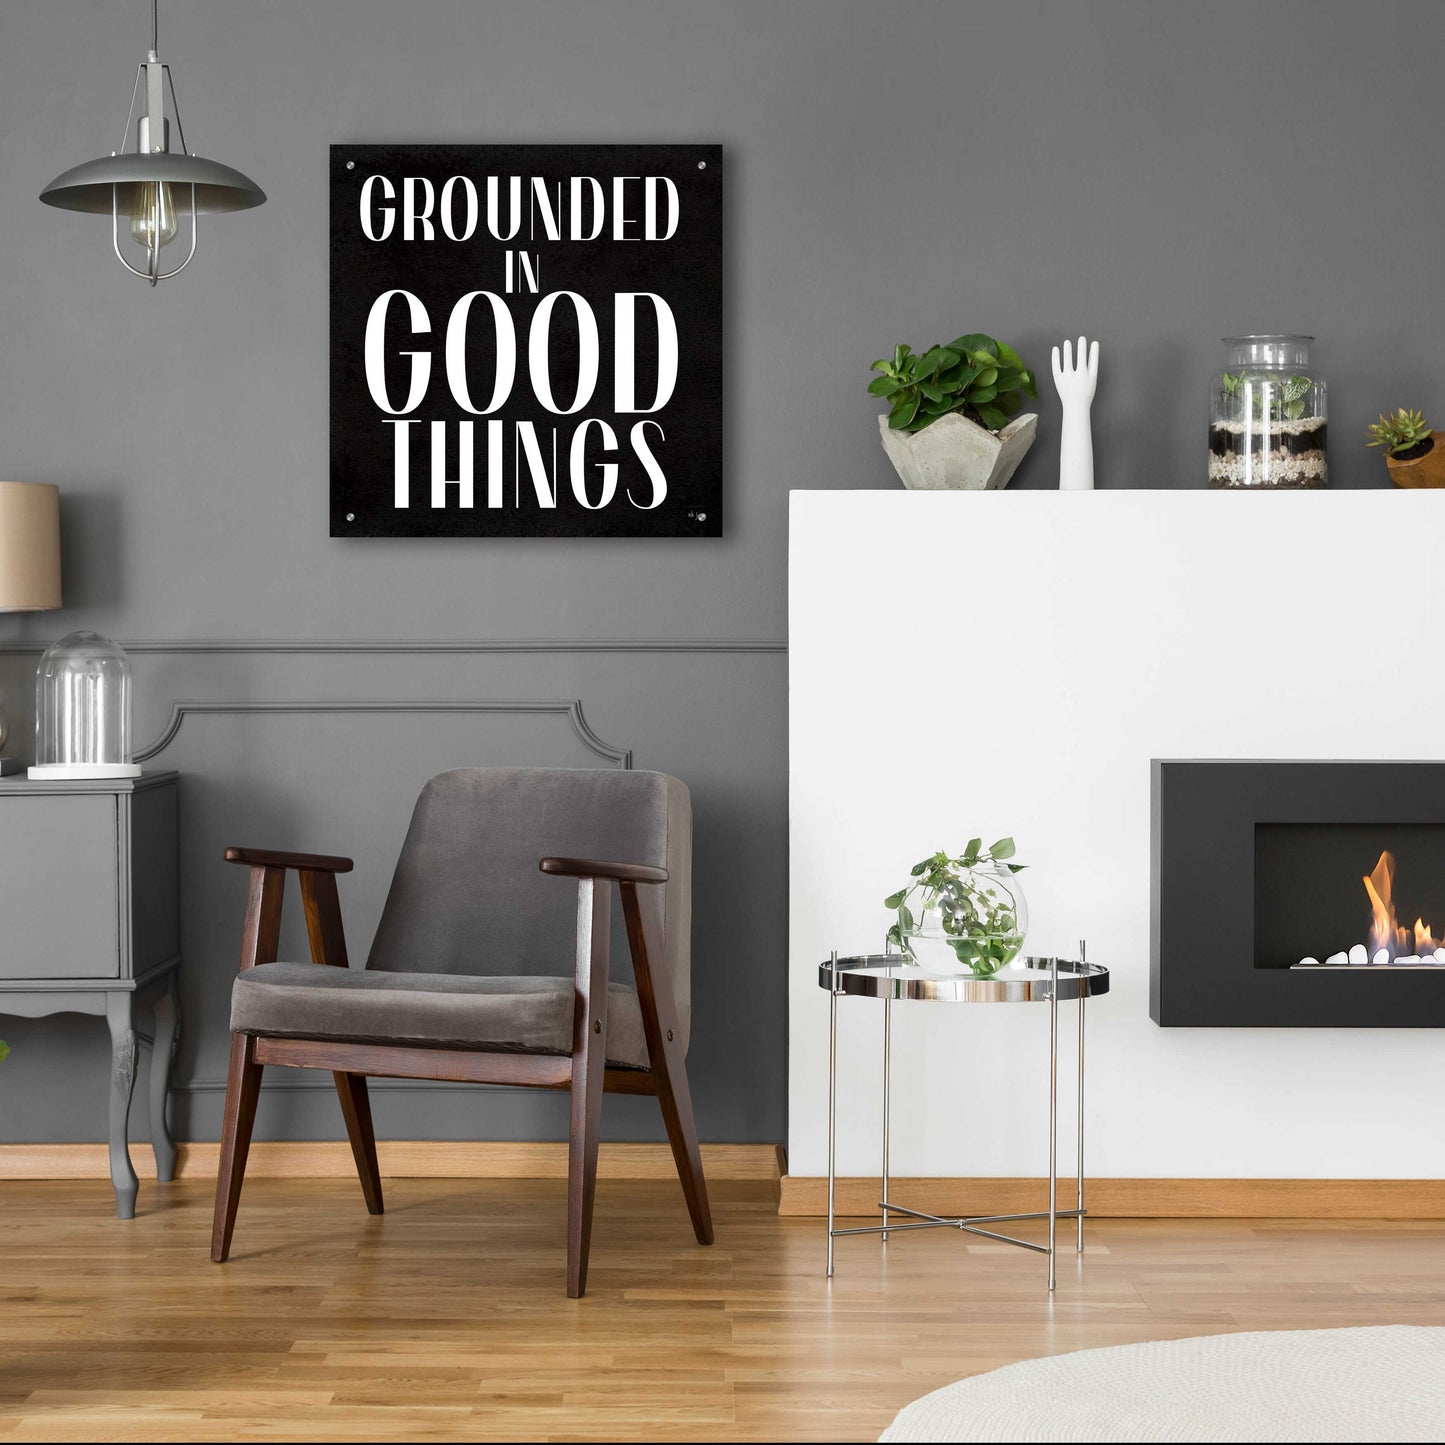 Epic Art 'Grounded in Good Things' by Jaxn Blvd., Acrylic Glass Wall Art,24x24